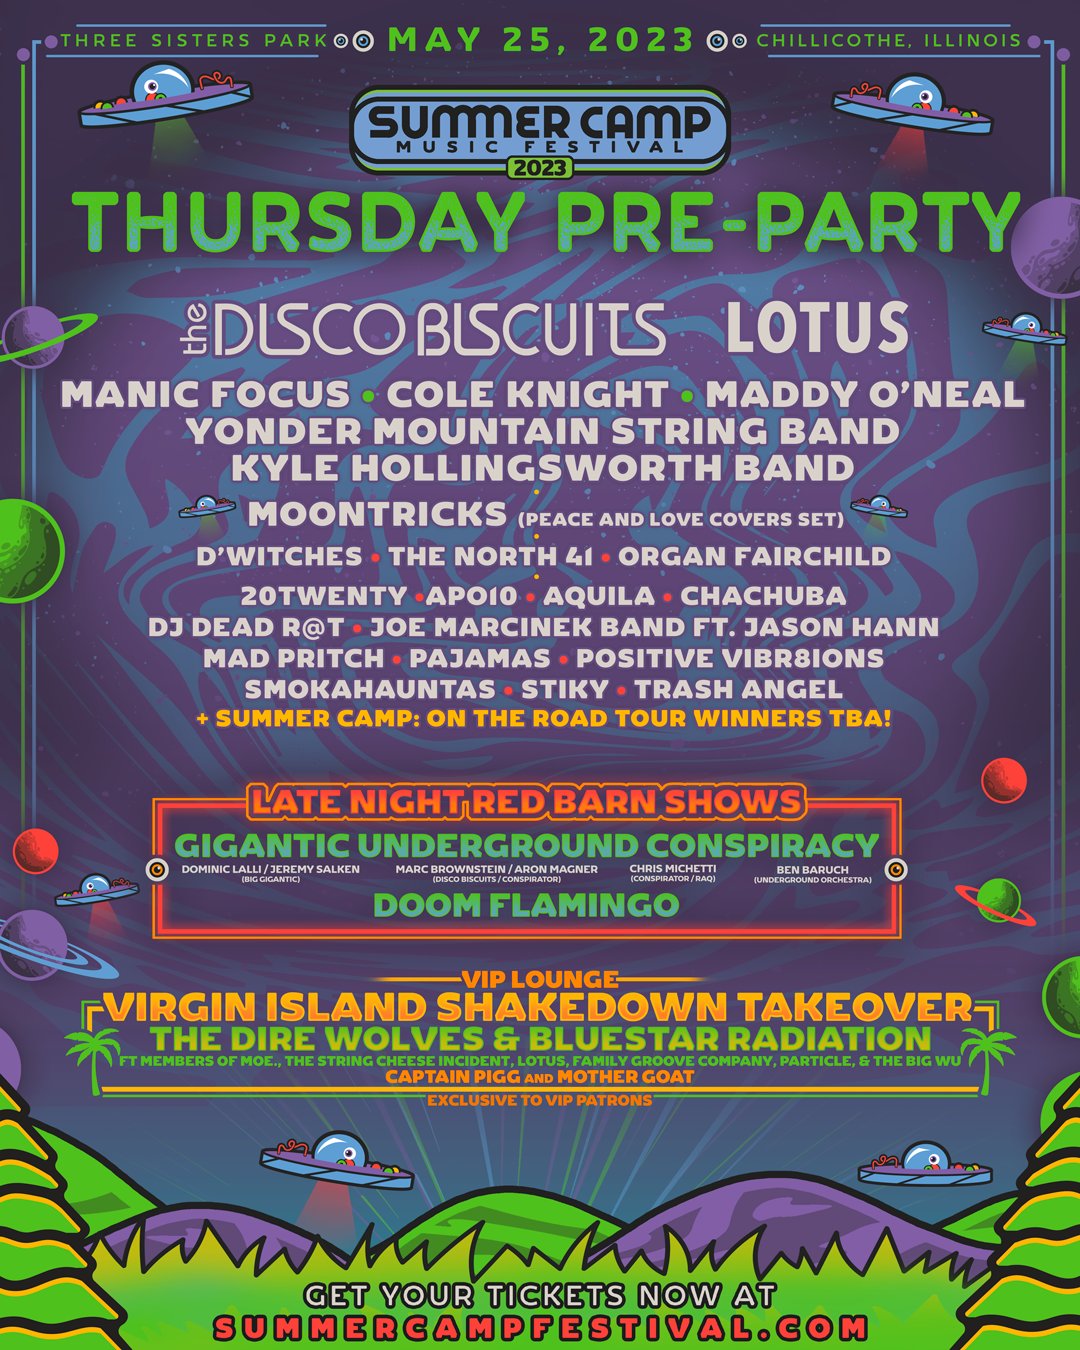 Thursday Pre-Party Lineup Released | Summer Camp Music Festival